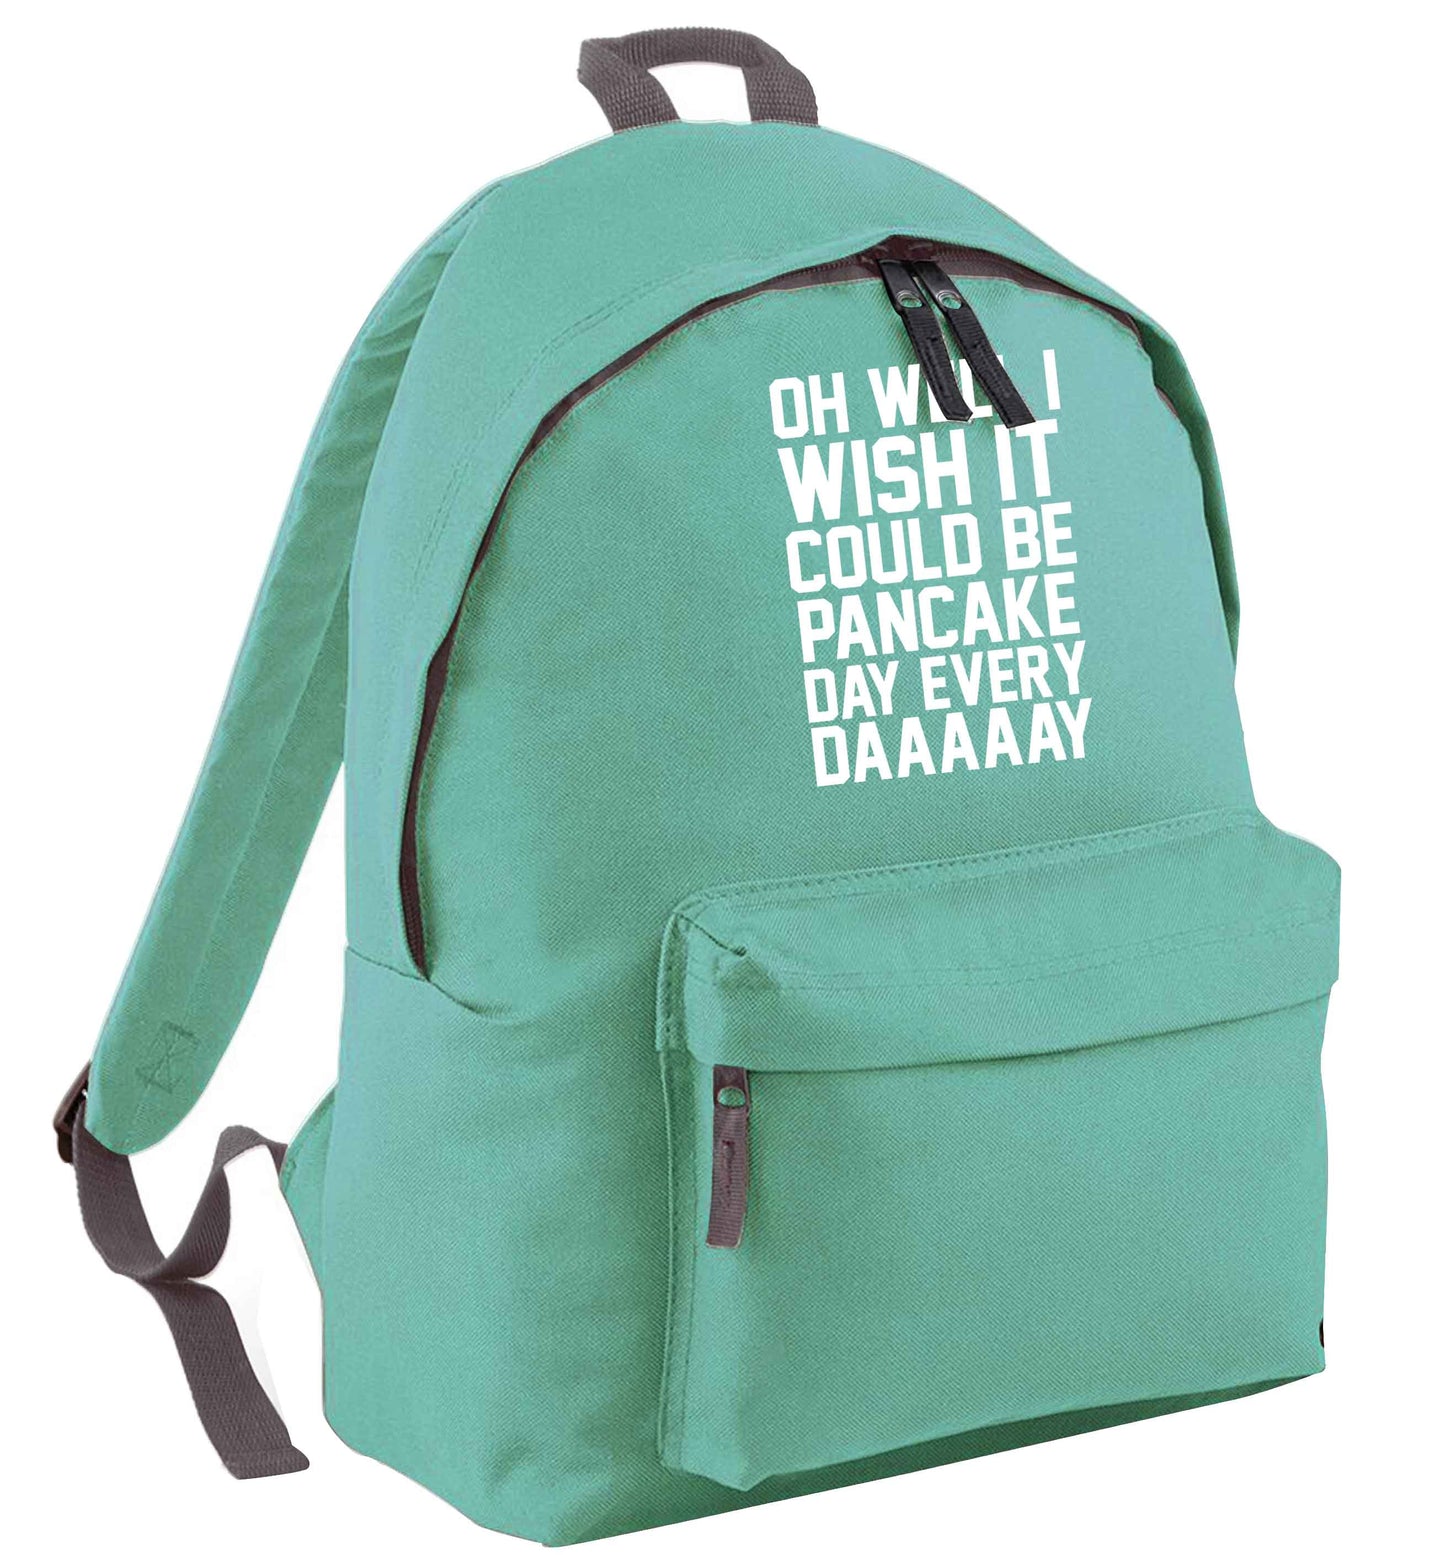 Oh well I wish it could be pancake day every day mint adults backpack